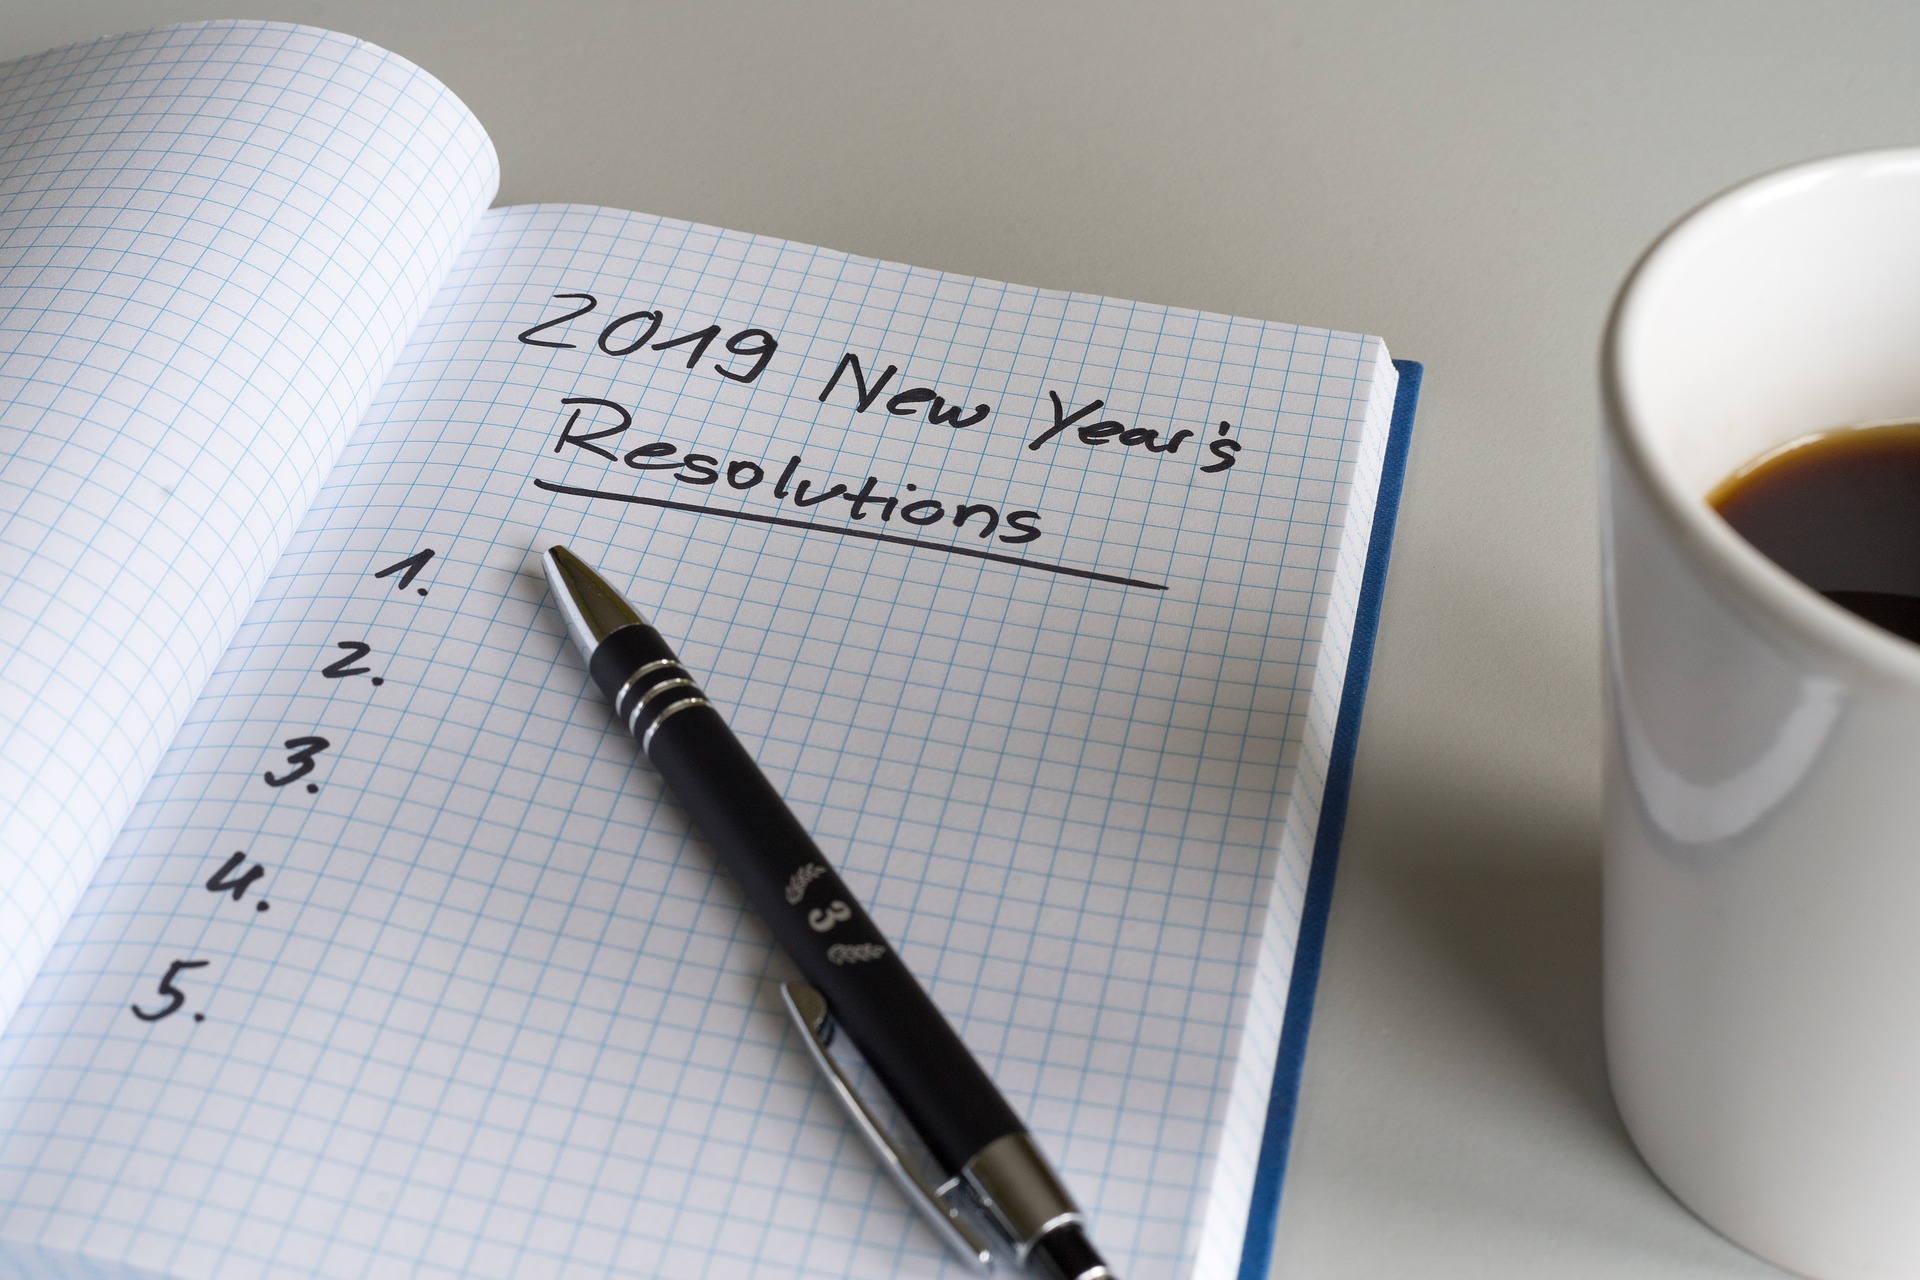 10 New Year’s Resolutions You Can Actually Stick To